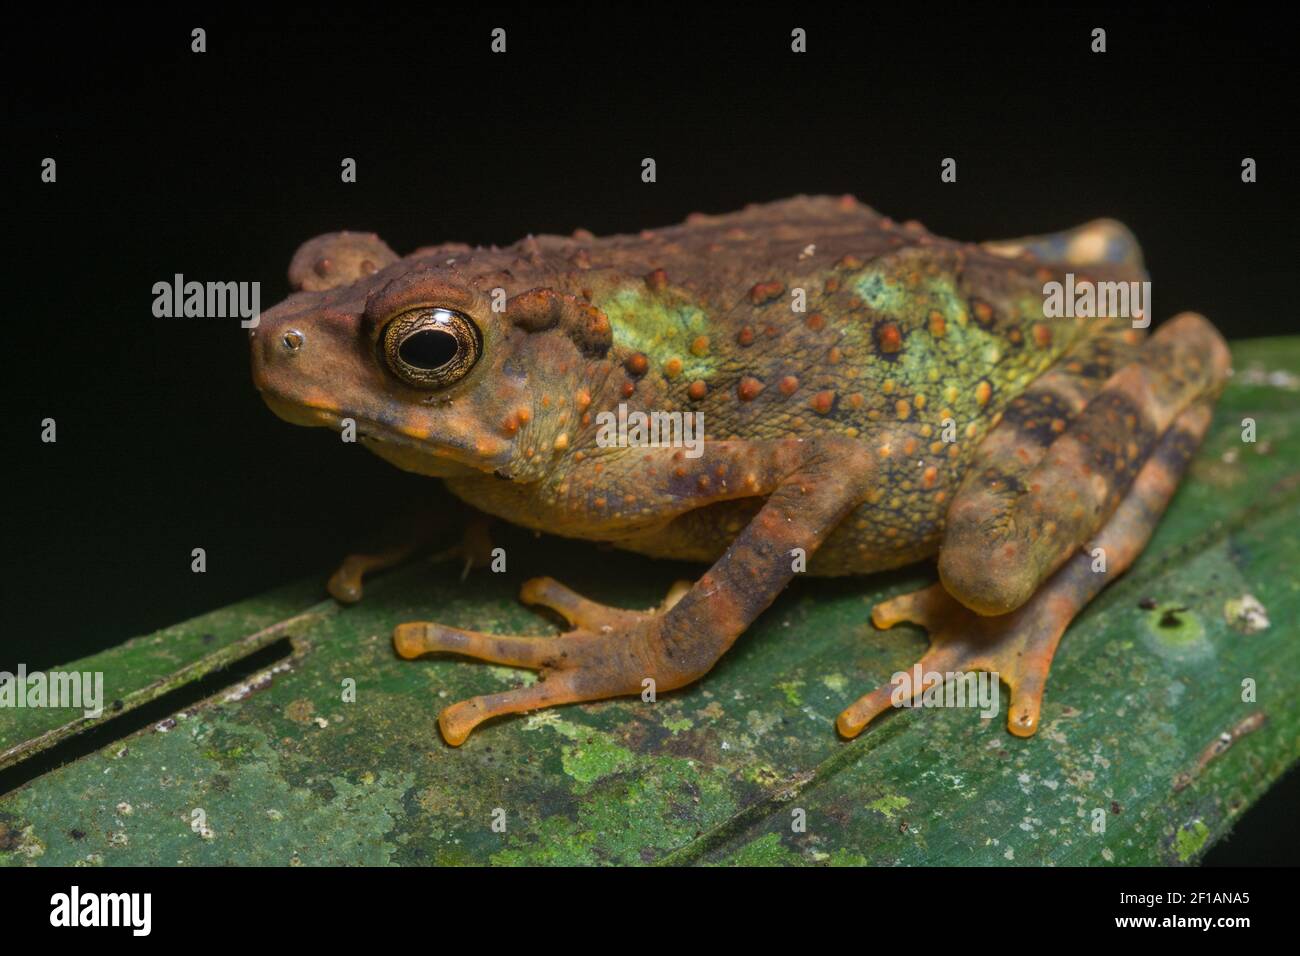 A juvenile Rentapia hosii, an arboreal climbing toad found on the tropical forests of portions of Southeast Asia including Borneo. Stock Photo